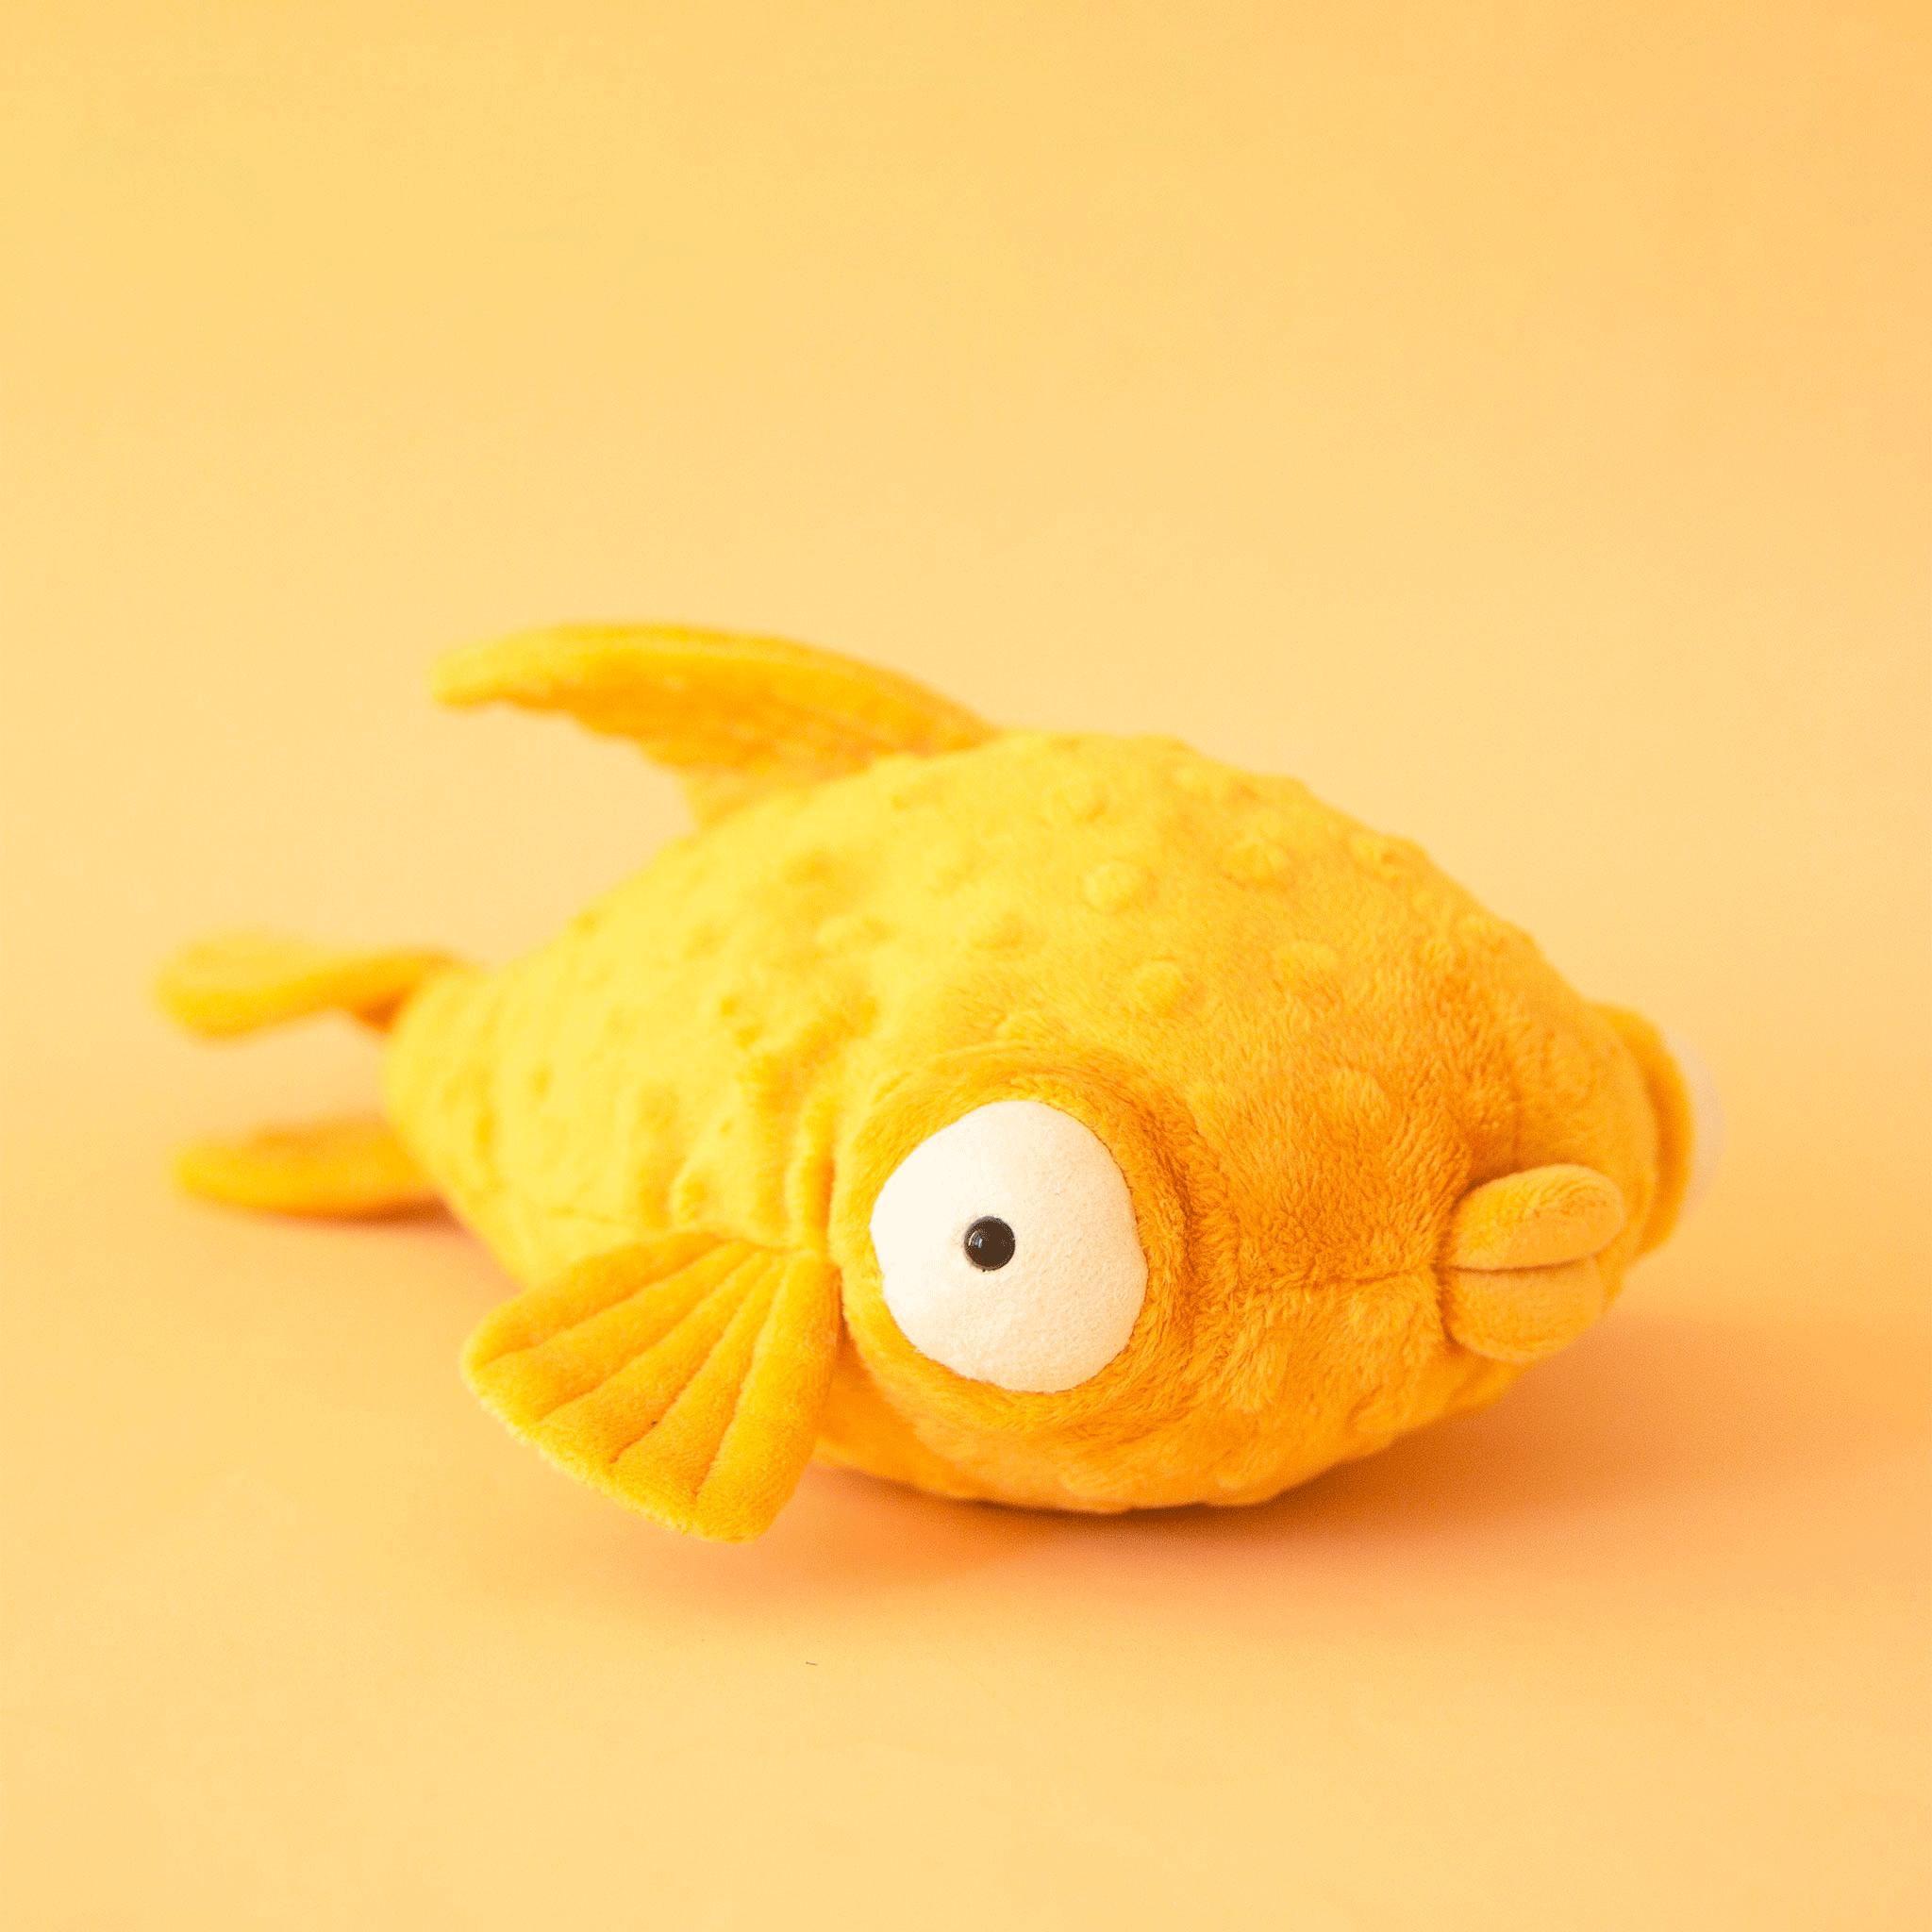 On a yellow background is a yellow stuffed toy fish with puffy eyes and lips.